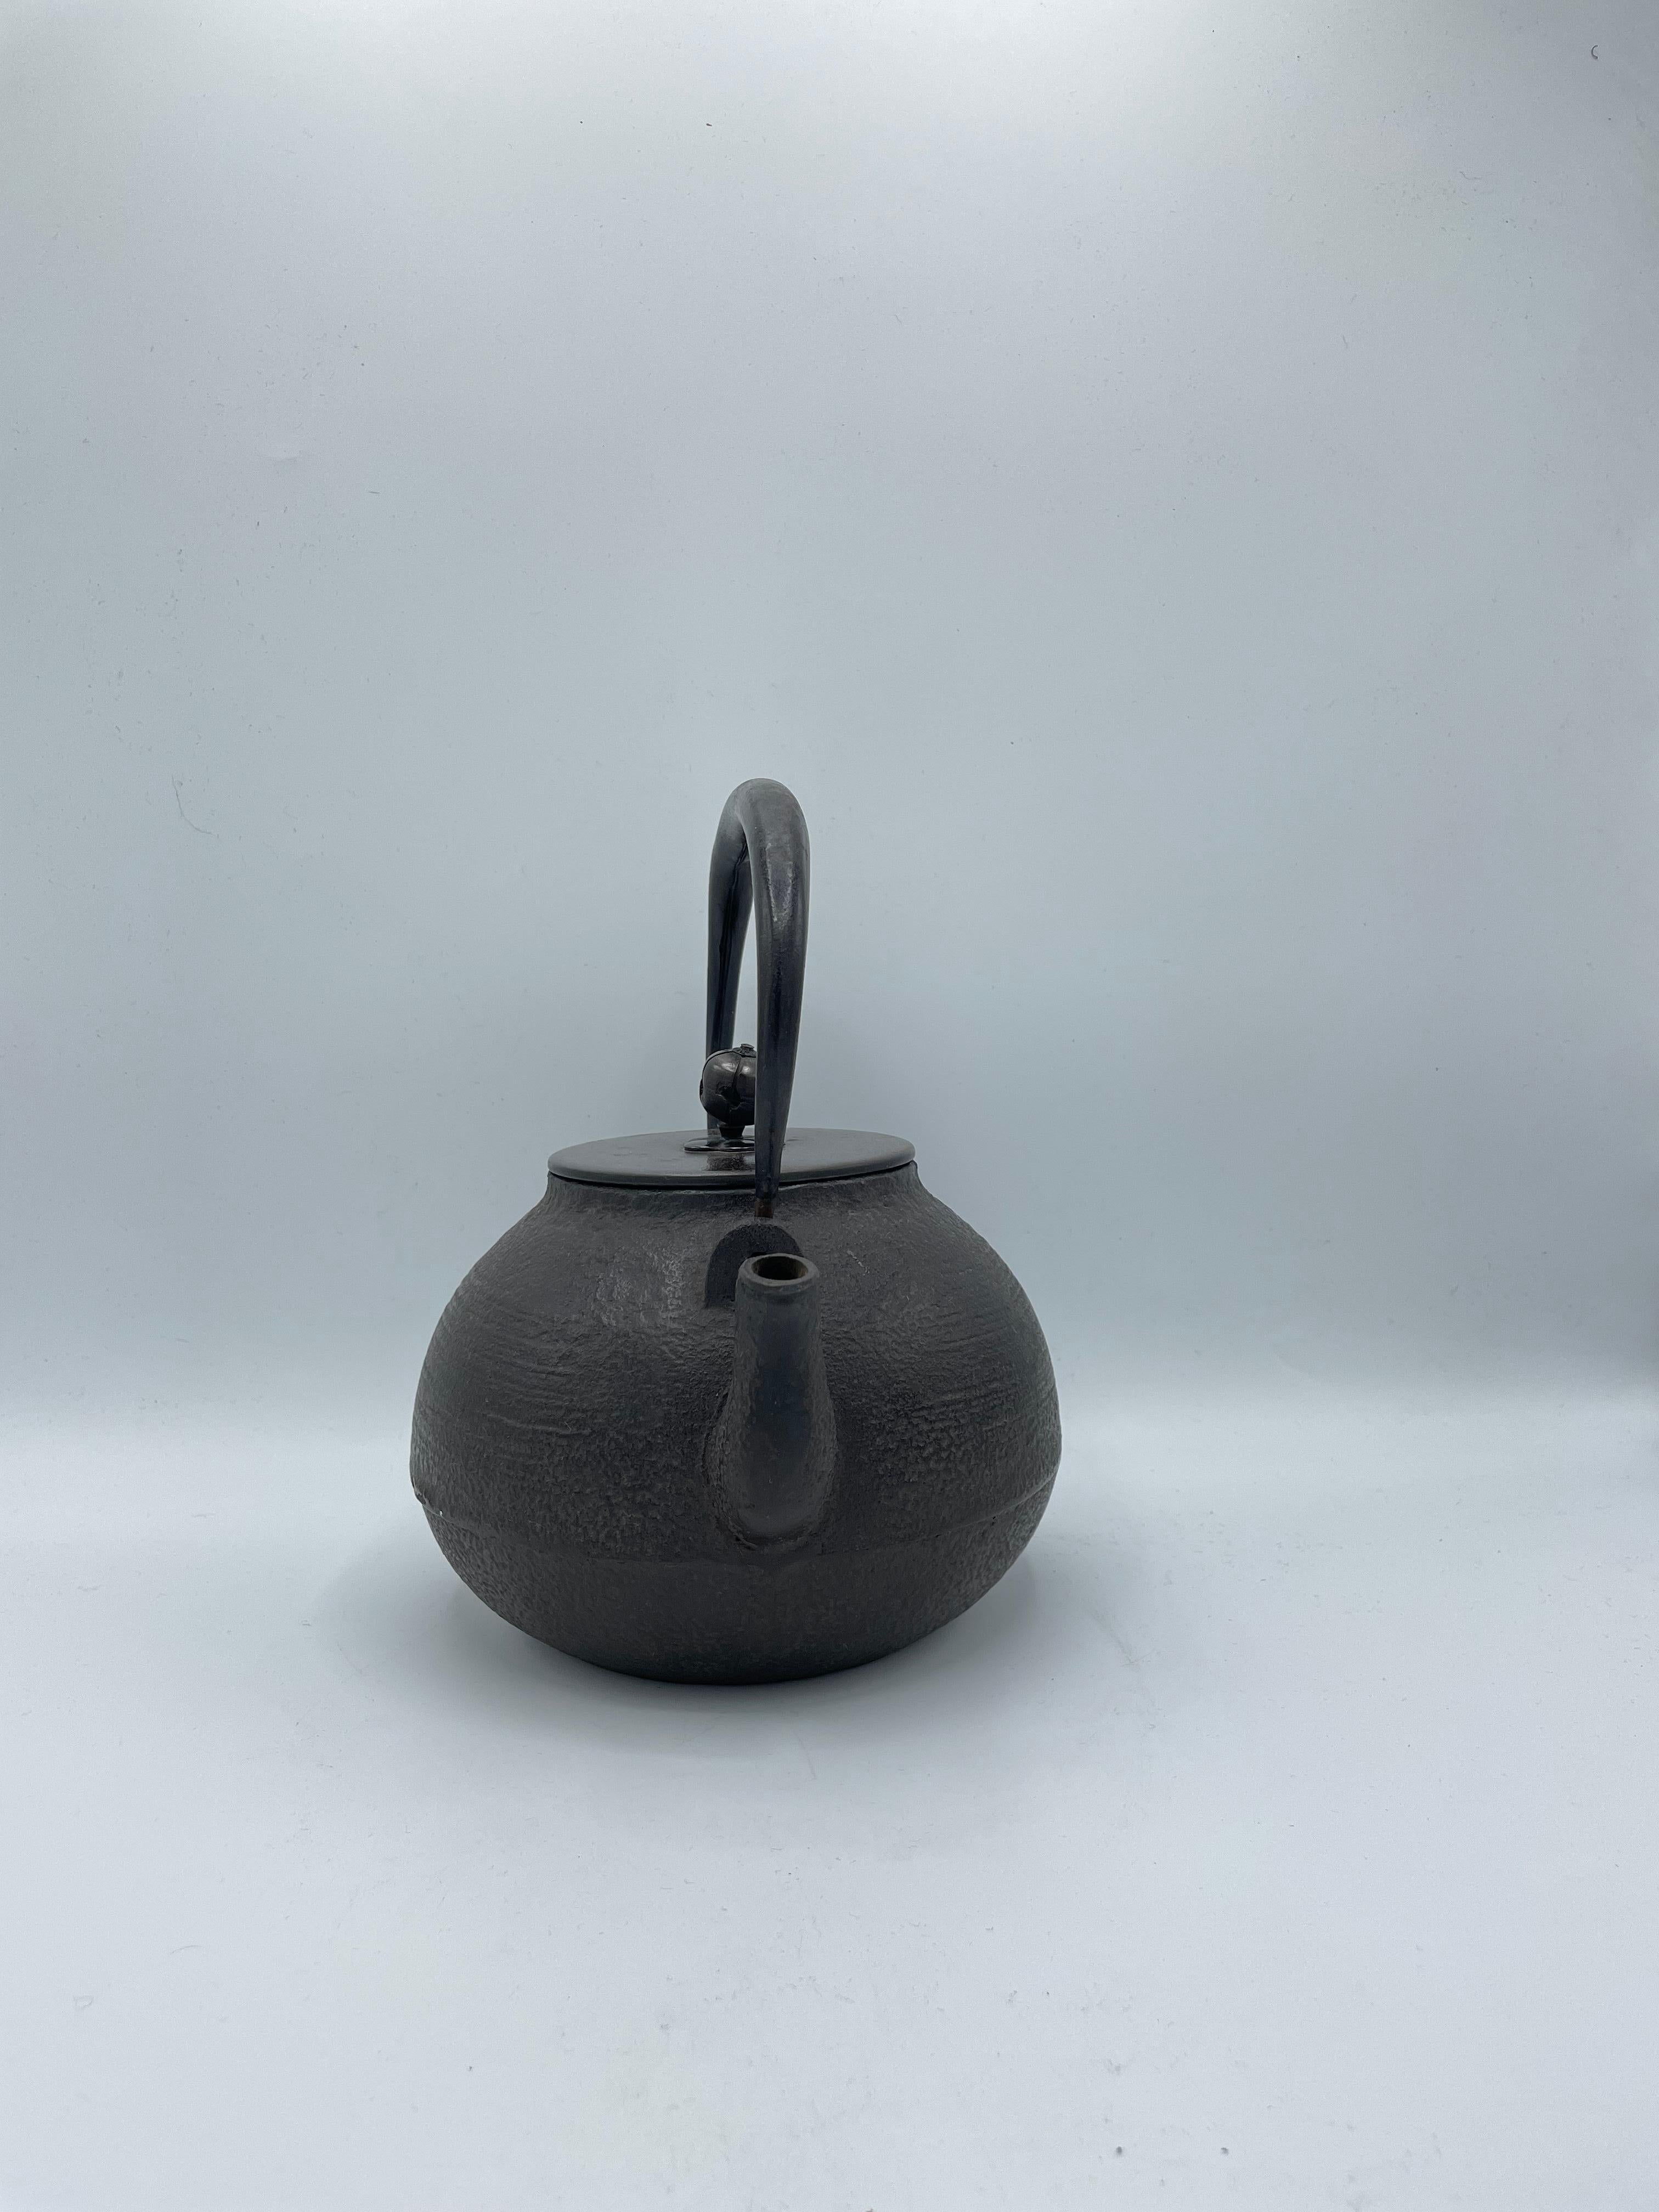 Antique Japanese Kettle with Iron Tetsubin 1930s 1